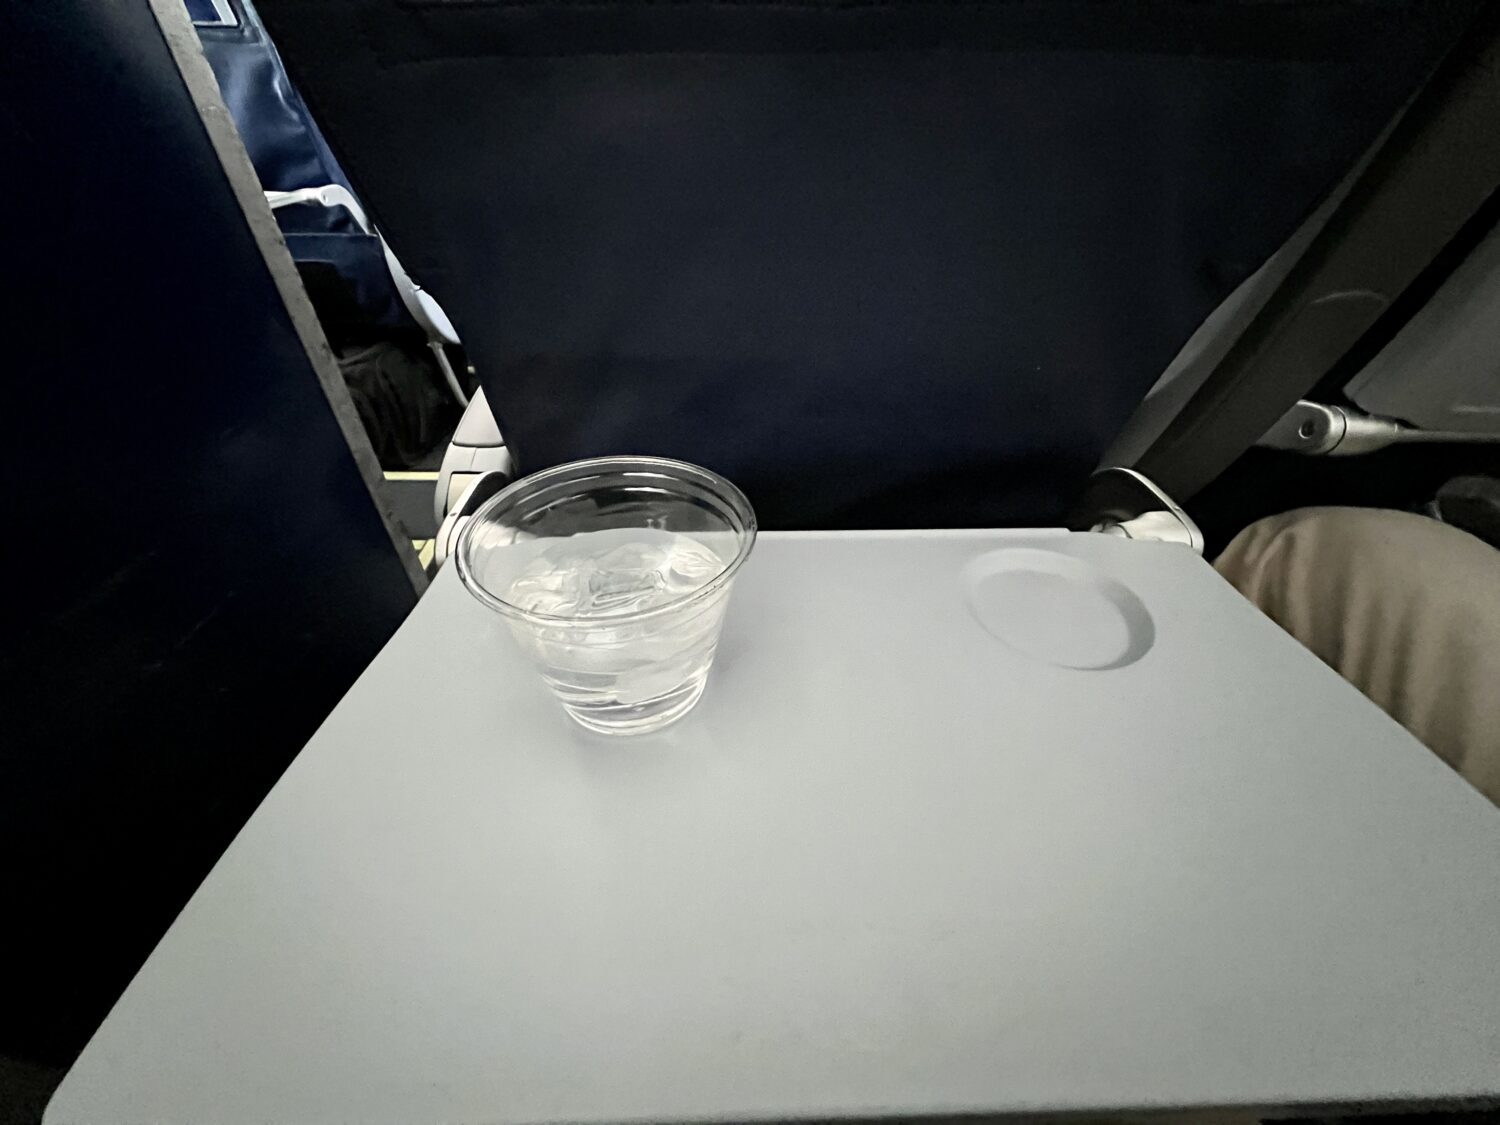 sun country airlines tray table